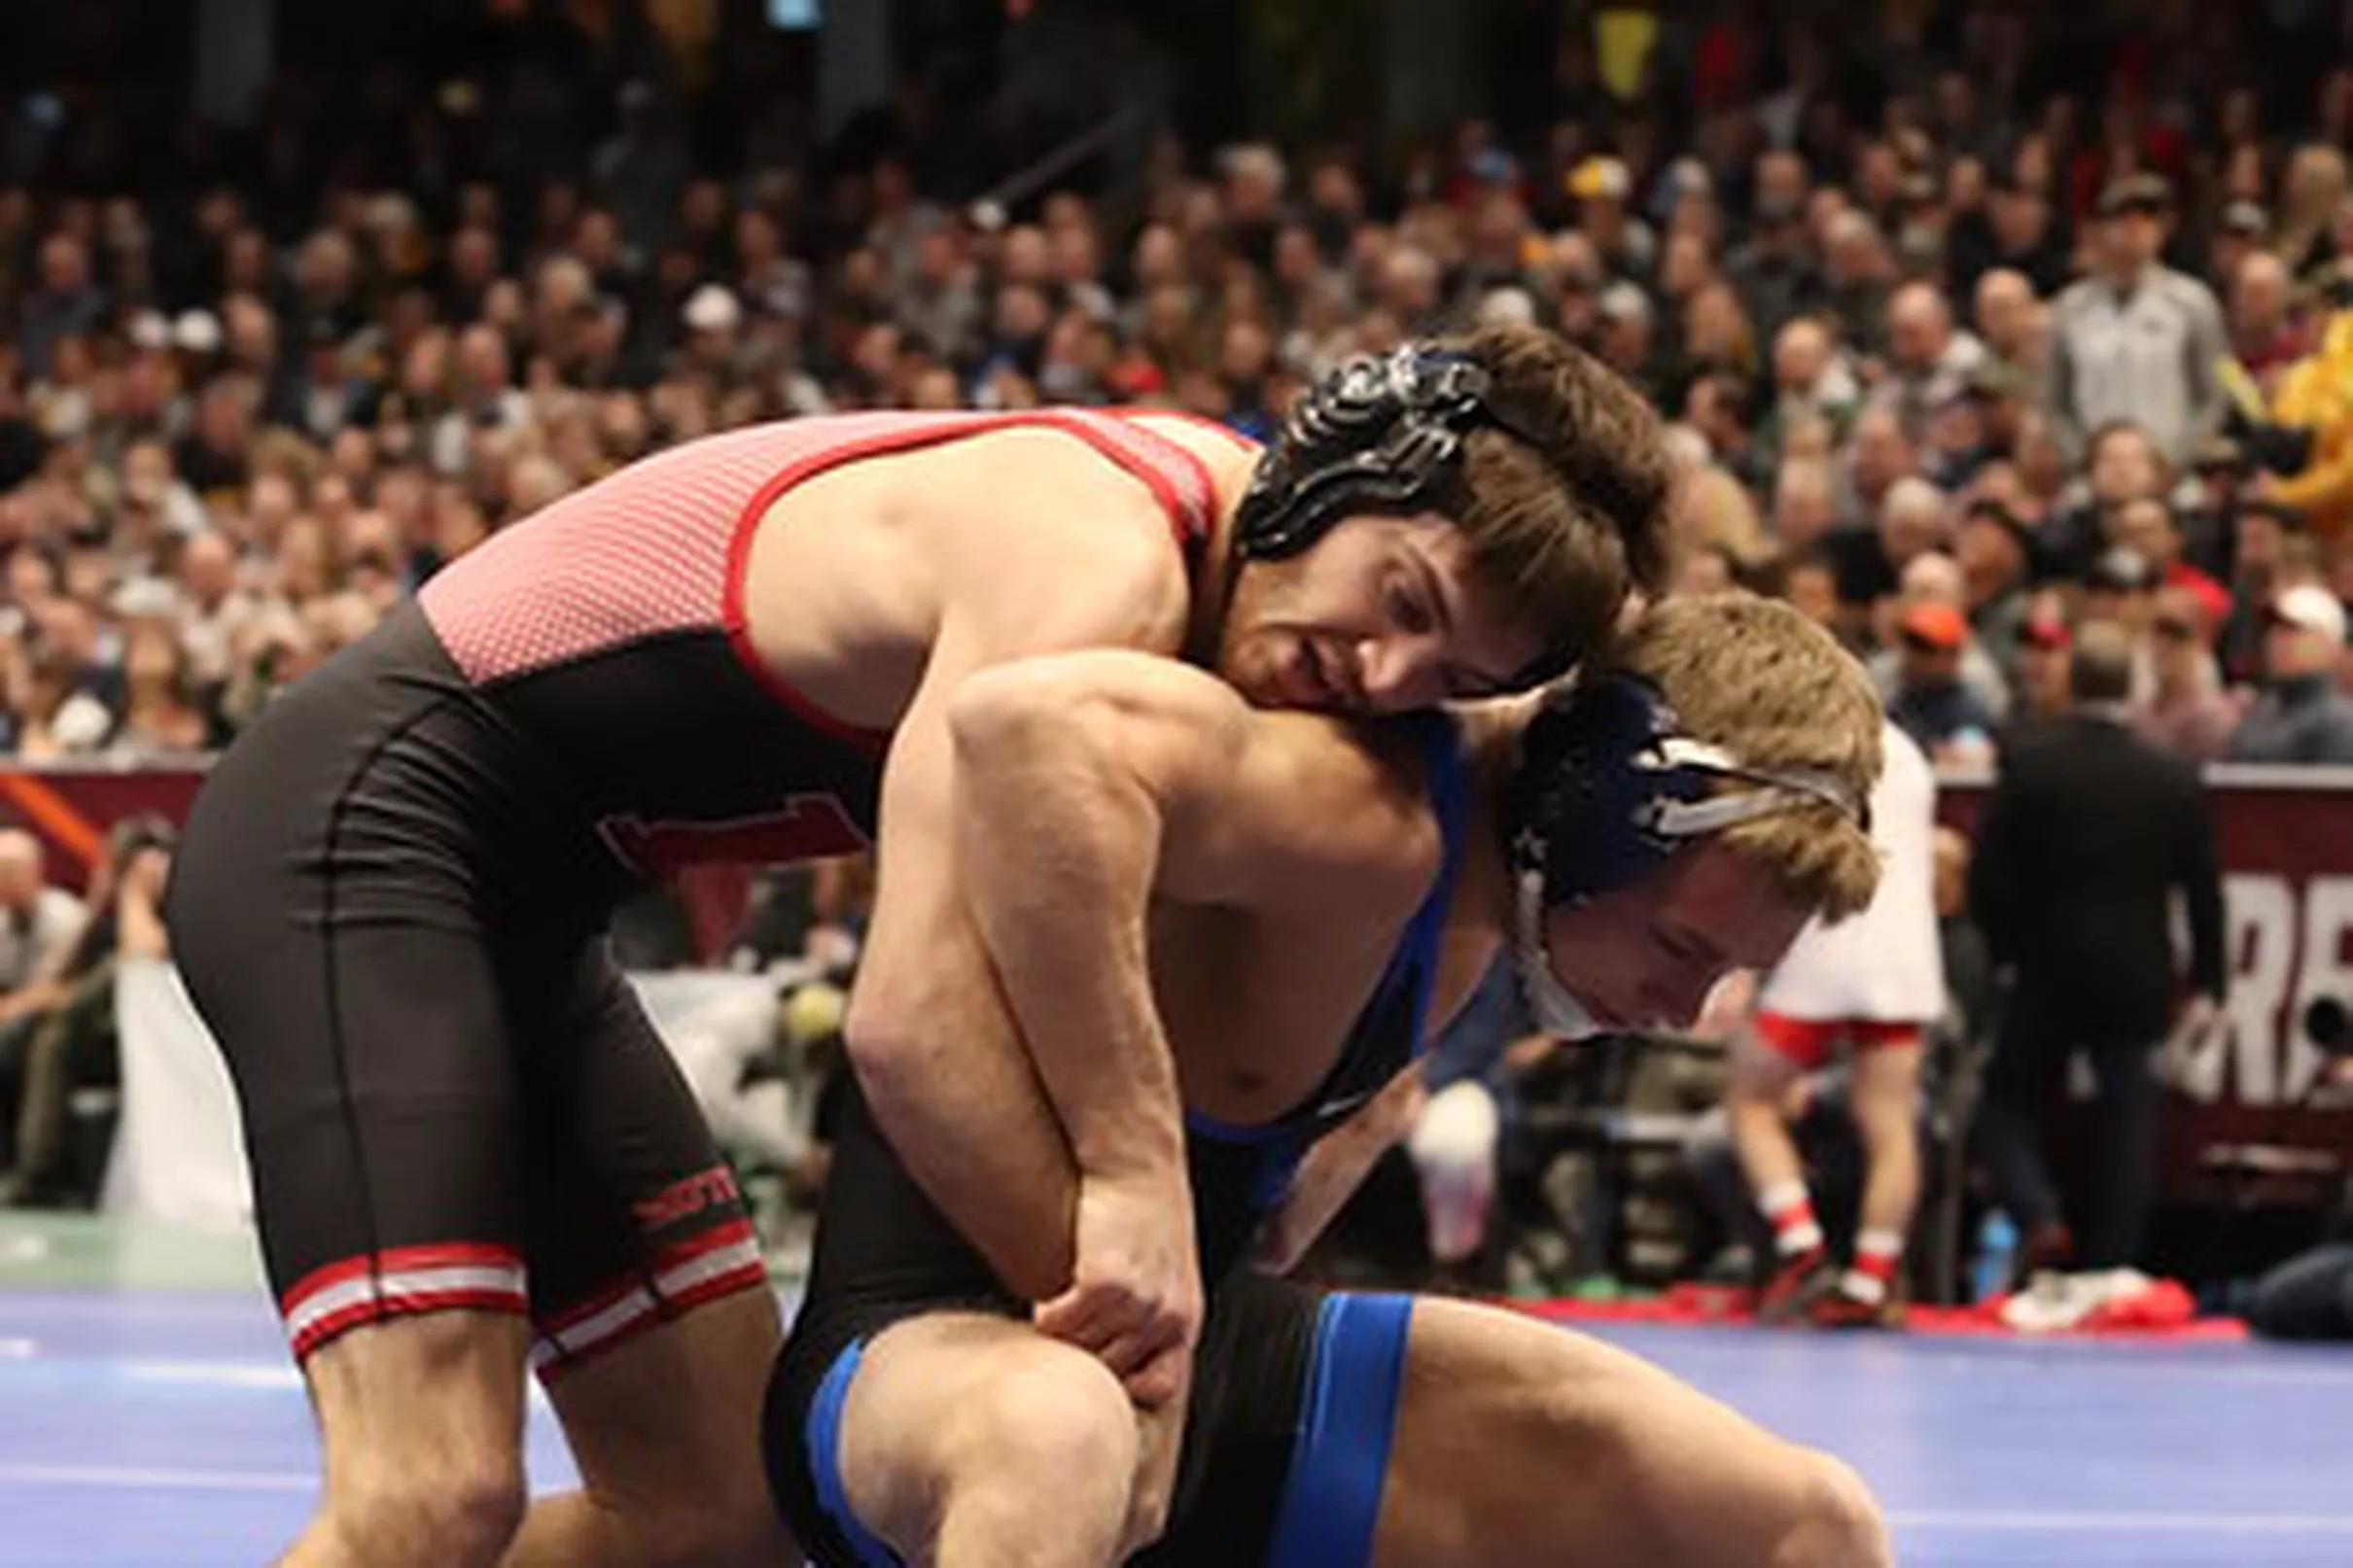 Flowrestling’s final individual rankings are good to Rutgers wrestlers